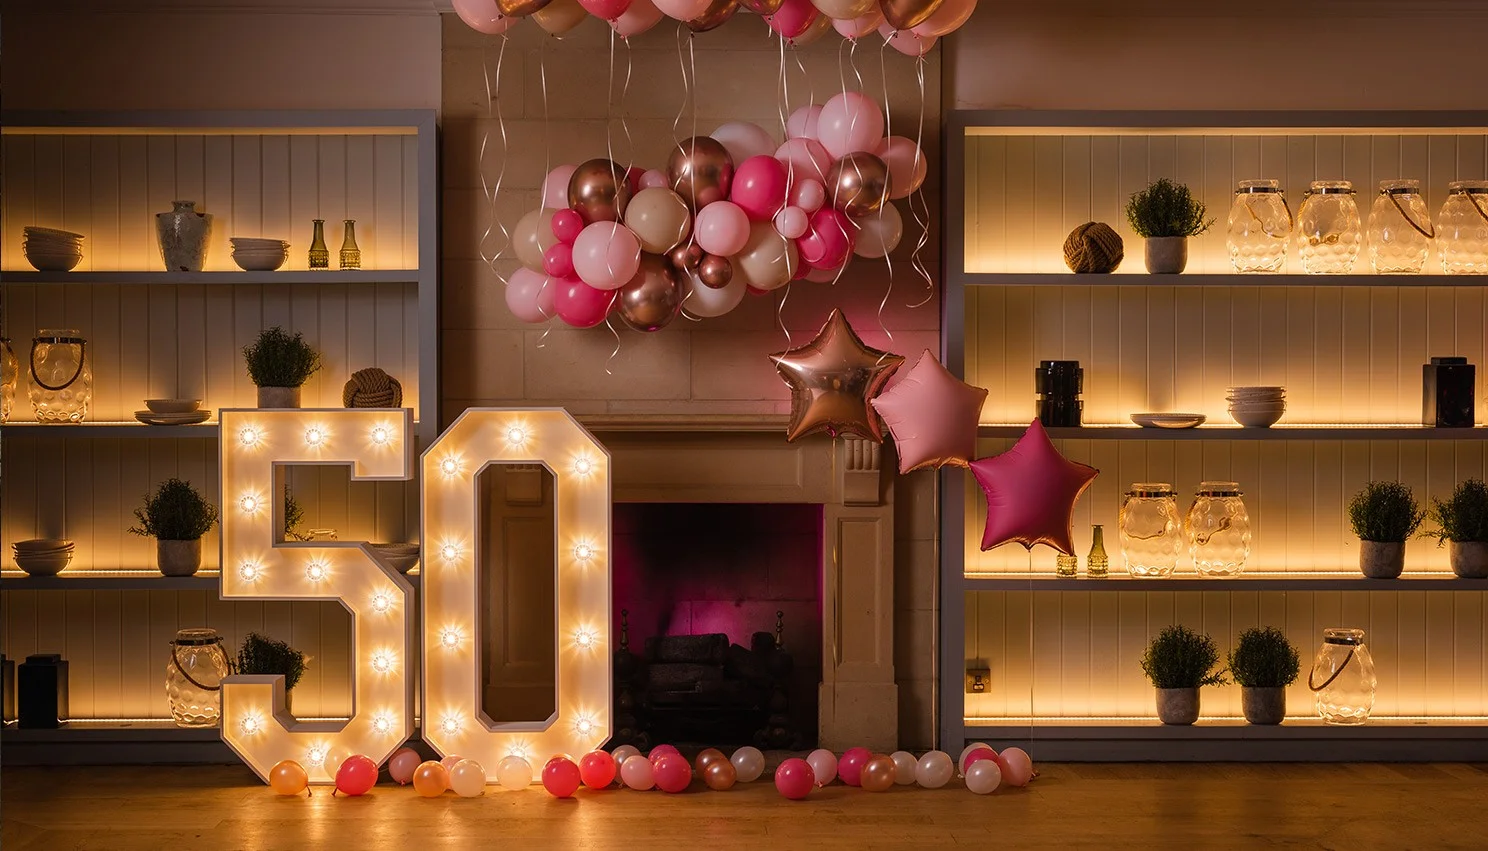 Birthday Party Decor Hire | WOW Factor Birthday Party Decor Hire, UK